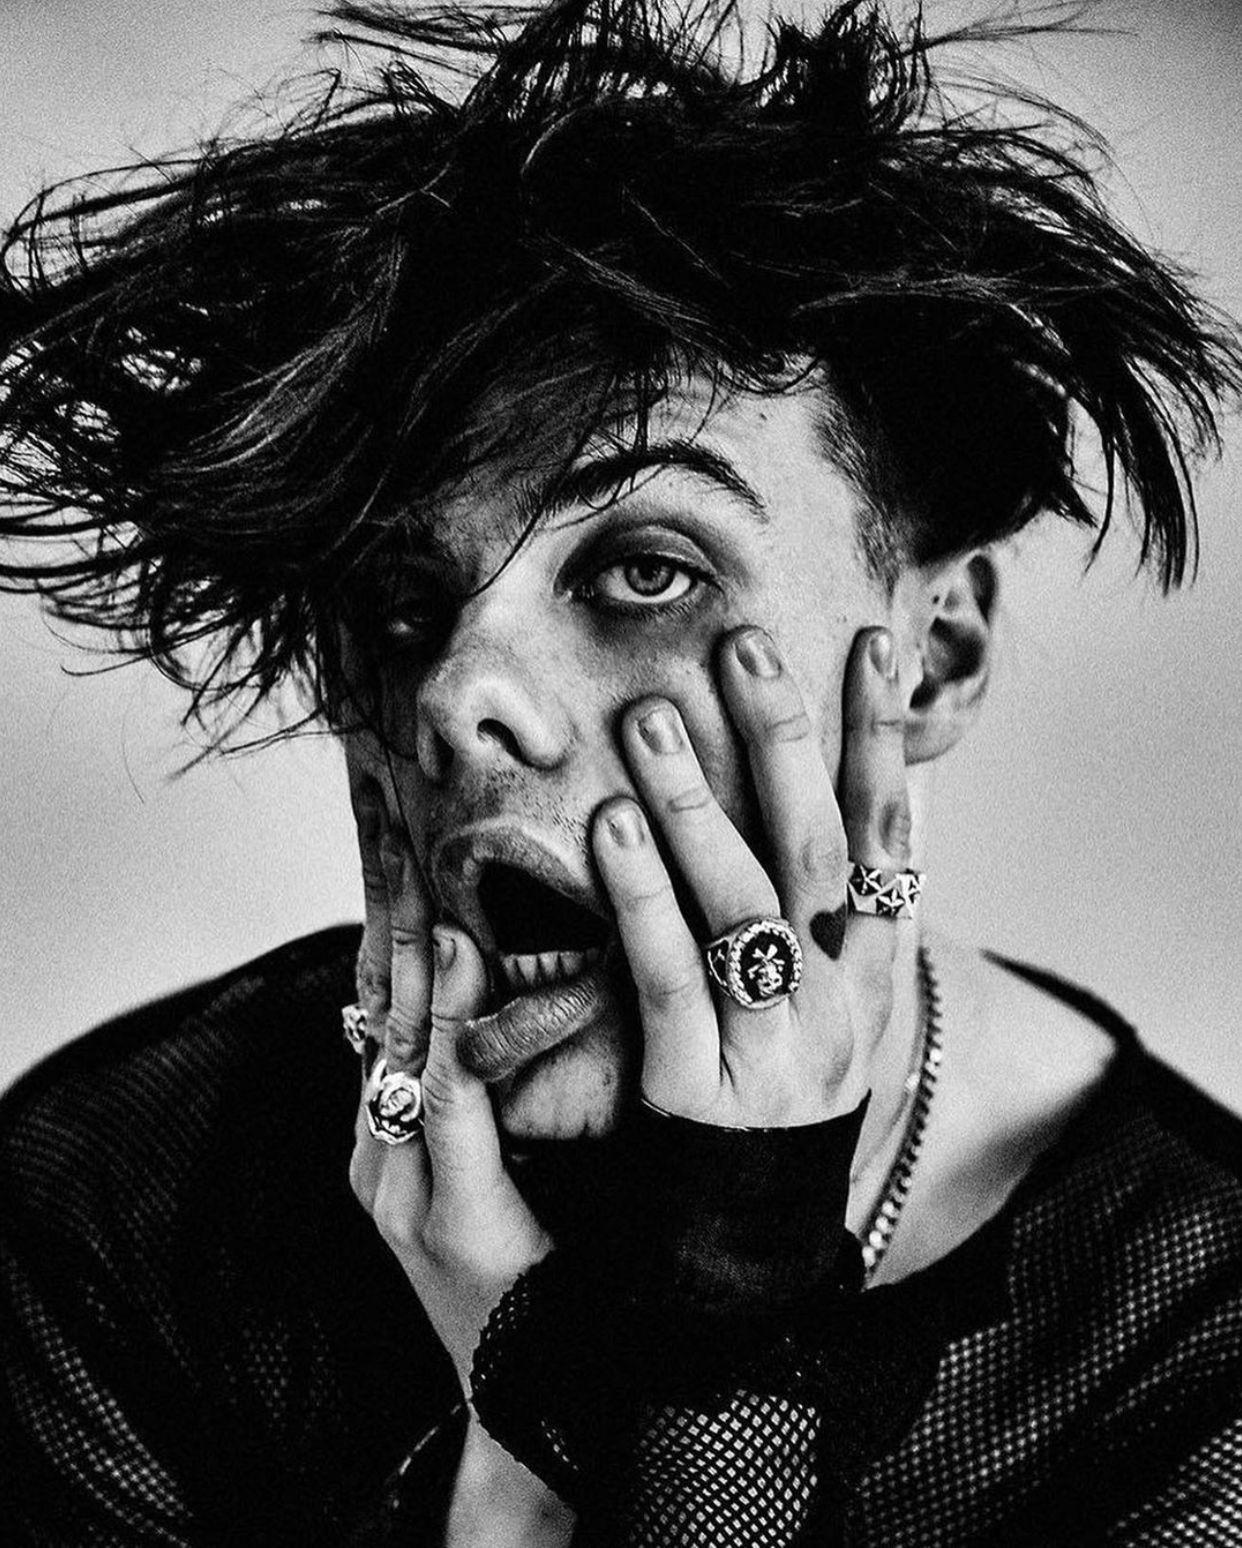 Yungblud Black and White Wallpapers - Top Free Yungblud Black and White ...